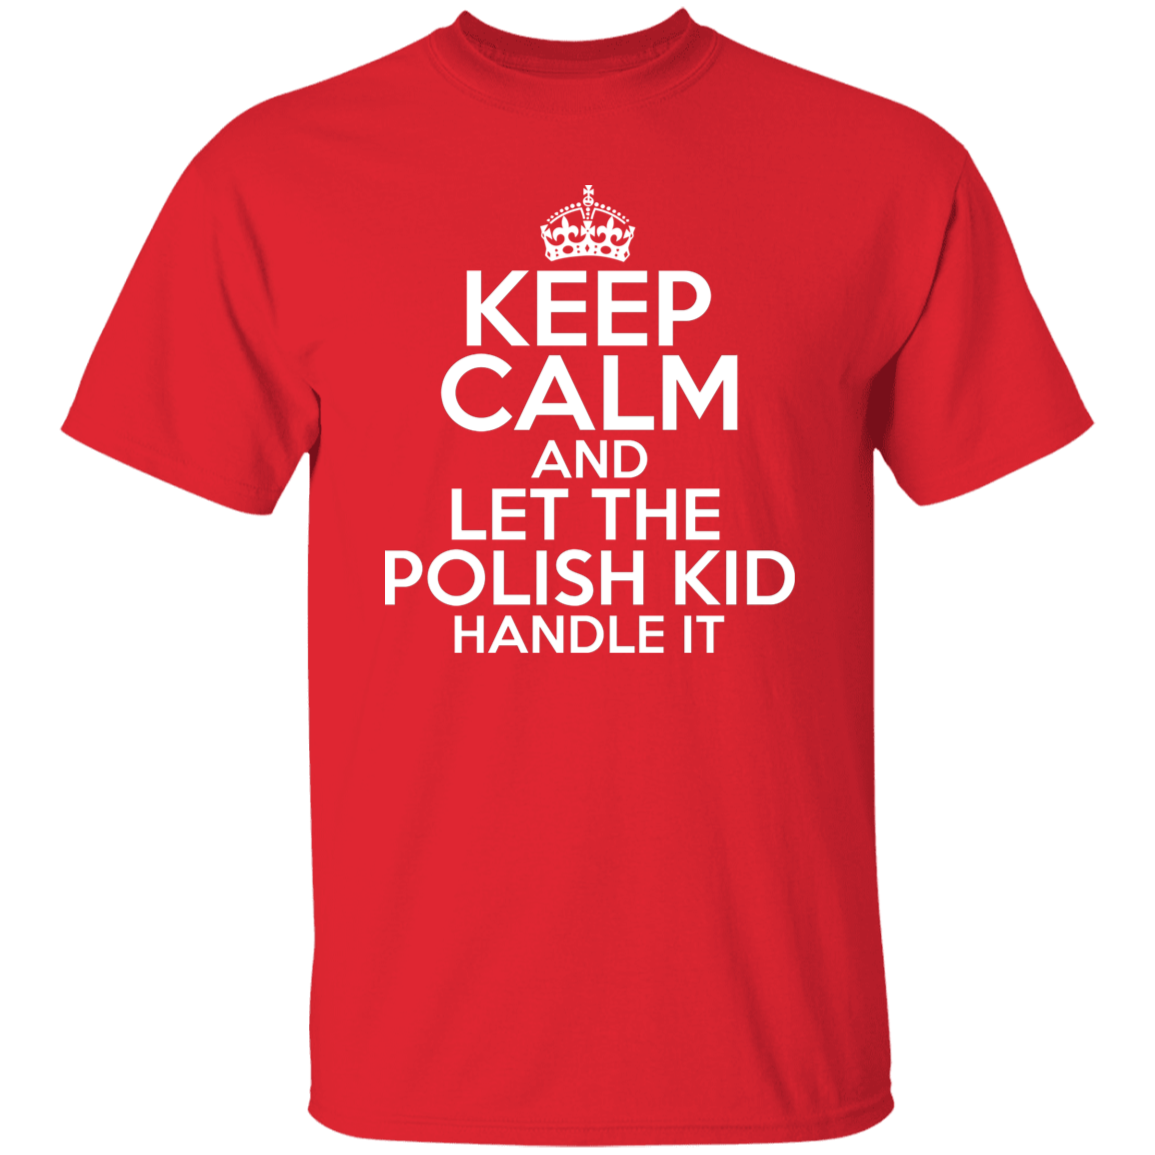 Keep Calm And Let The Polish Kid Handle It Apparel CustomCat G500 5.3 oz. T-Shirt Red S